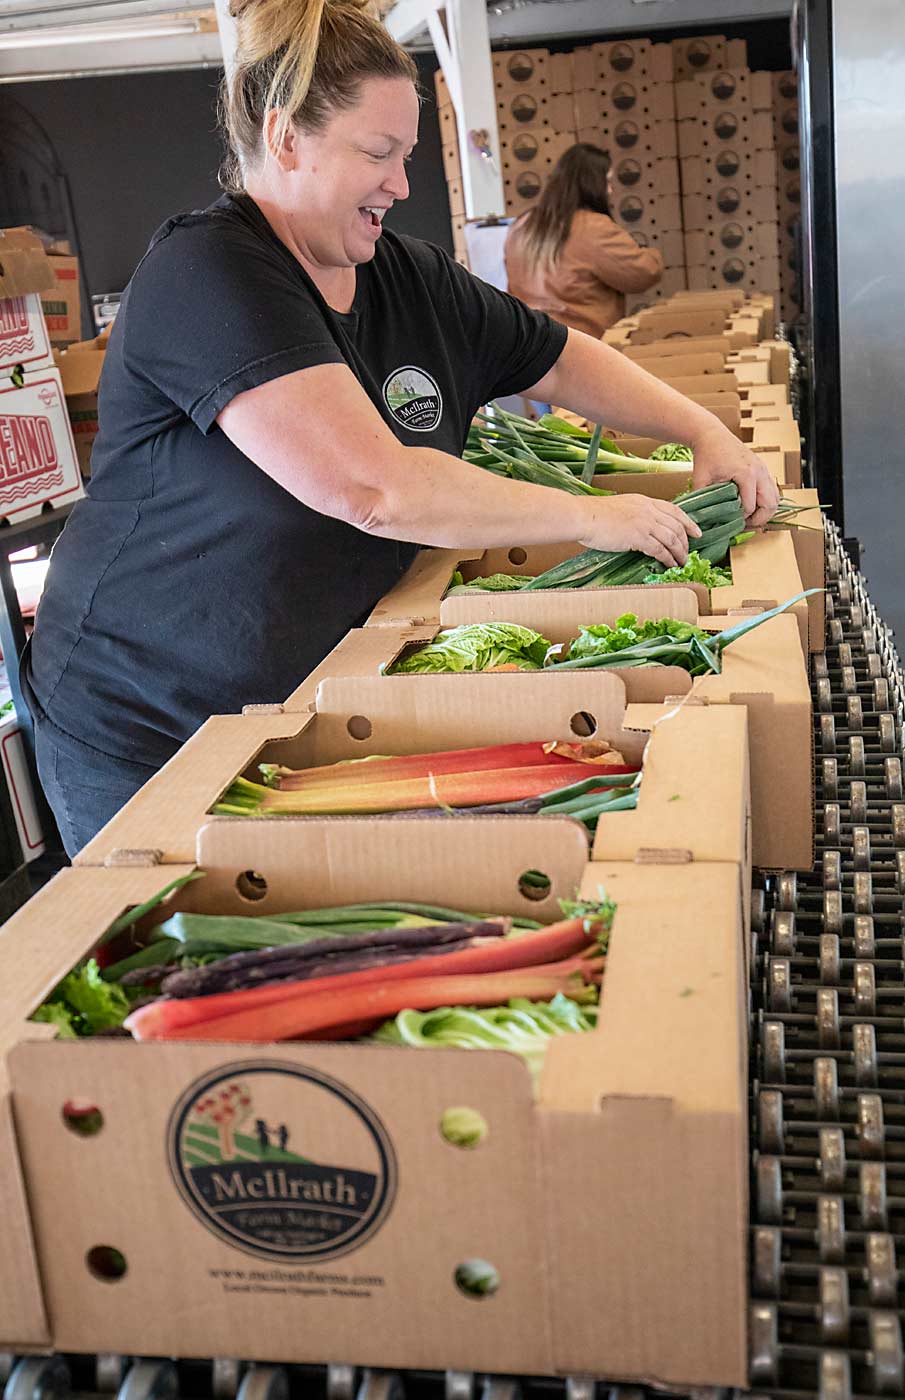 Laura McIlrath-Riel fills produce boxes with a wide variety of local and uncommon fruits and vegetables for delivery and pickup. She partners with a dozen local farms to supply the produce. (TJ Mullinax/Good Fruit Grower)